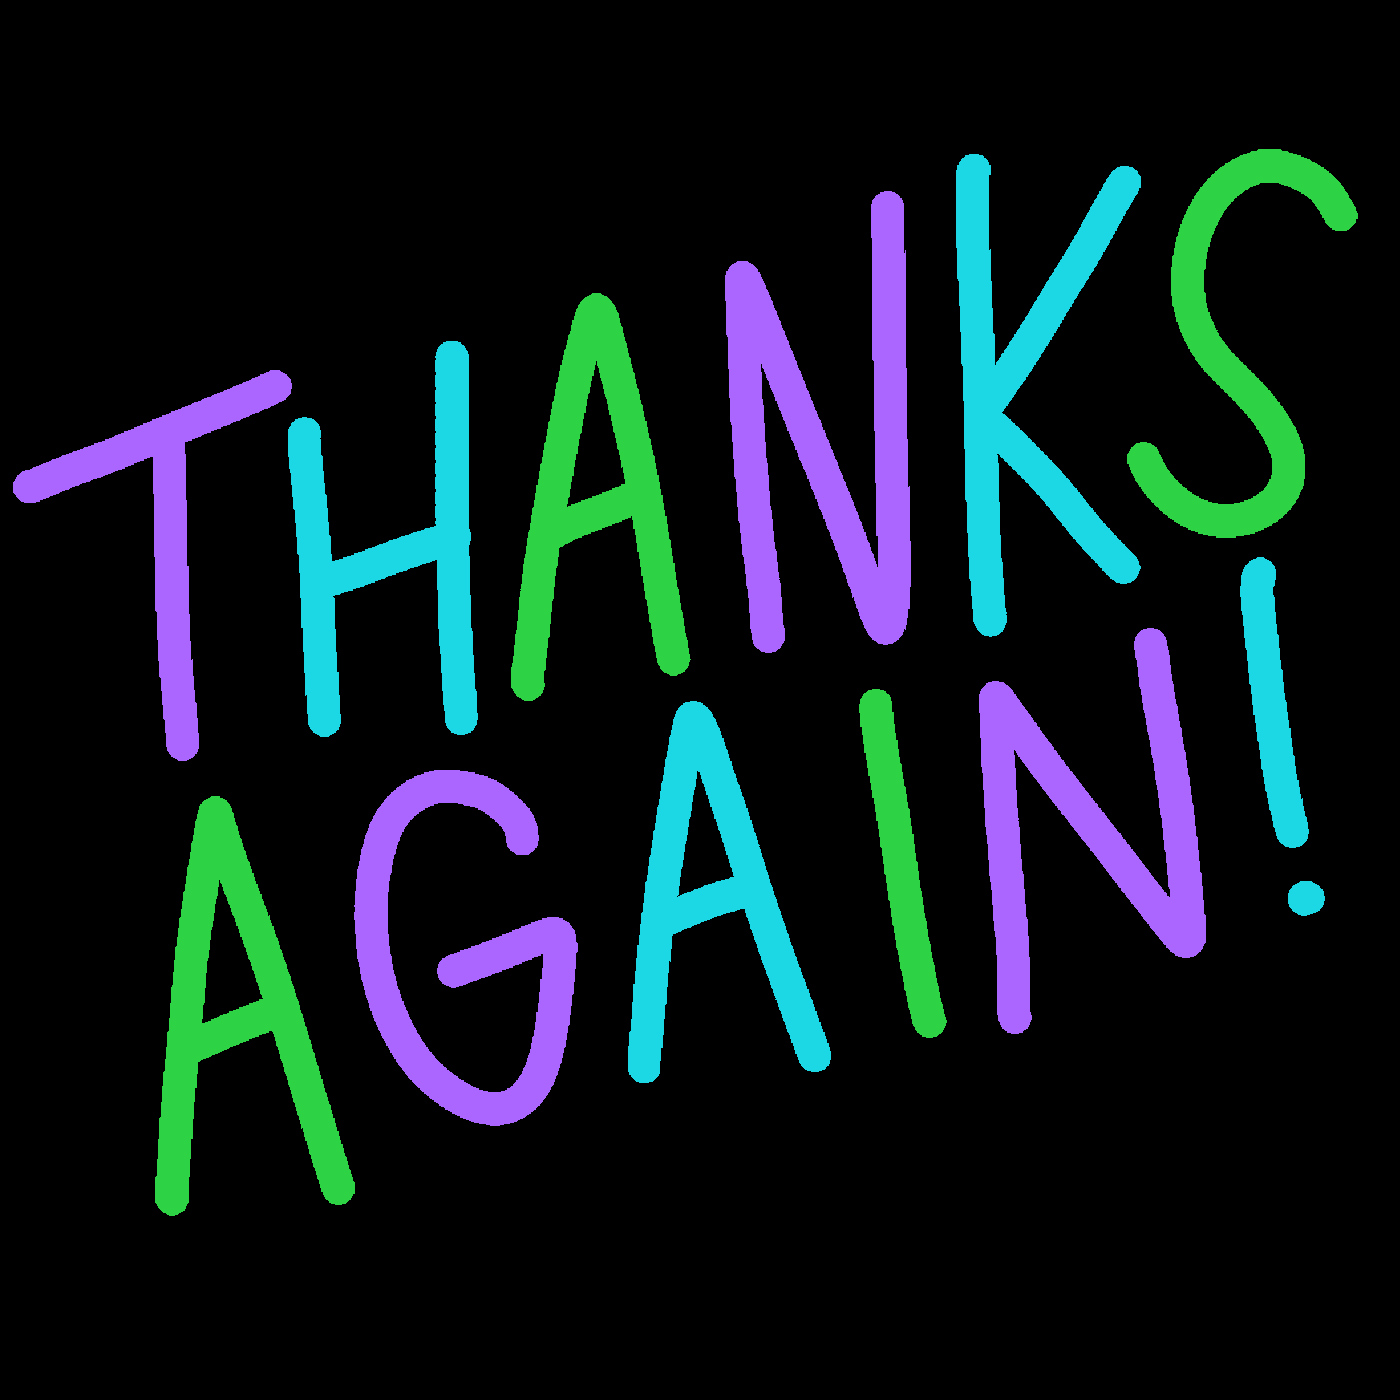 Text gif. Flashing in changing colors and capital letters is the message, “Thanks again!”